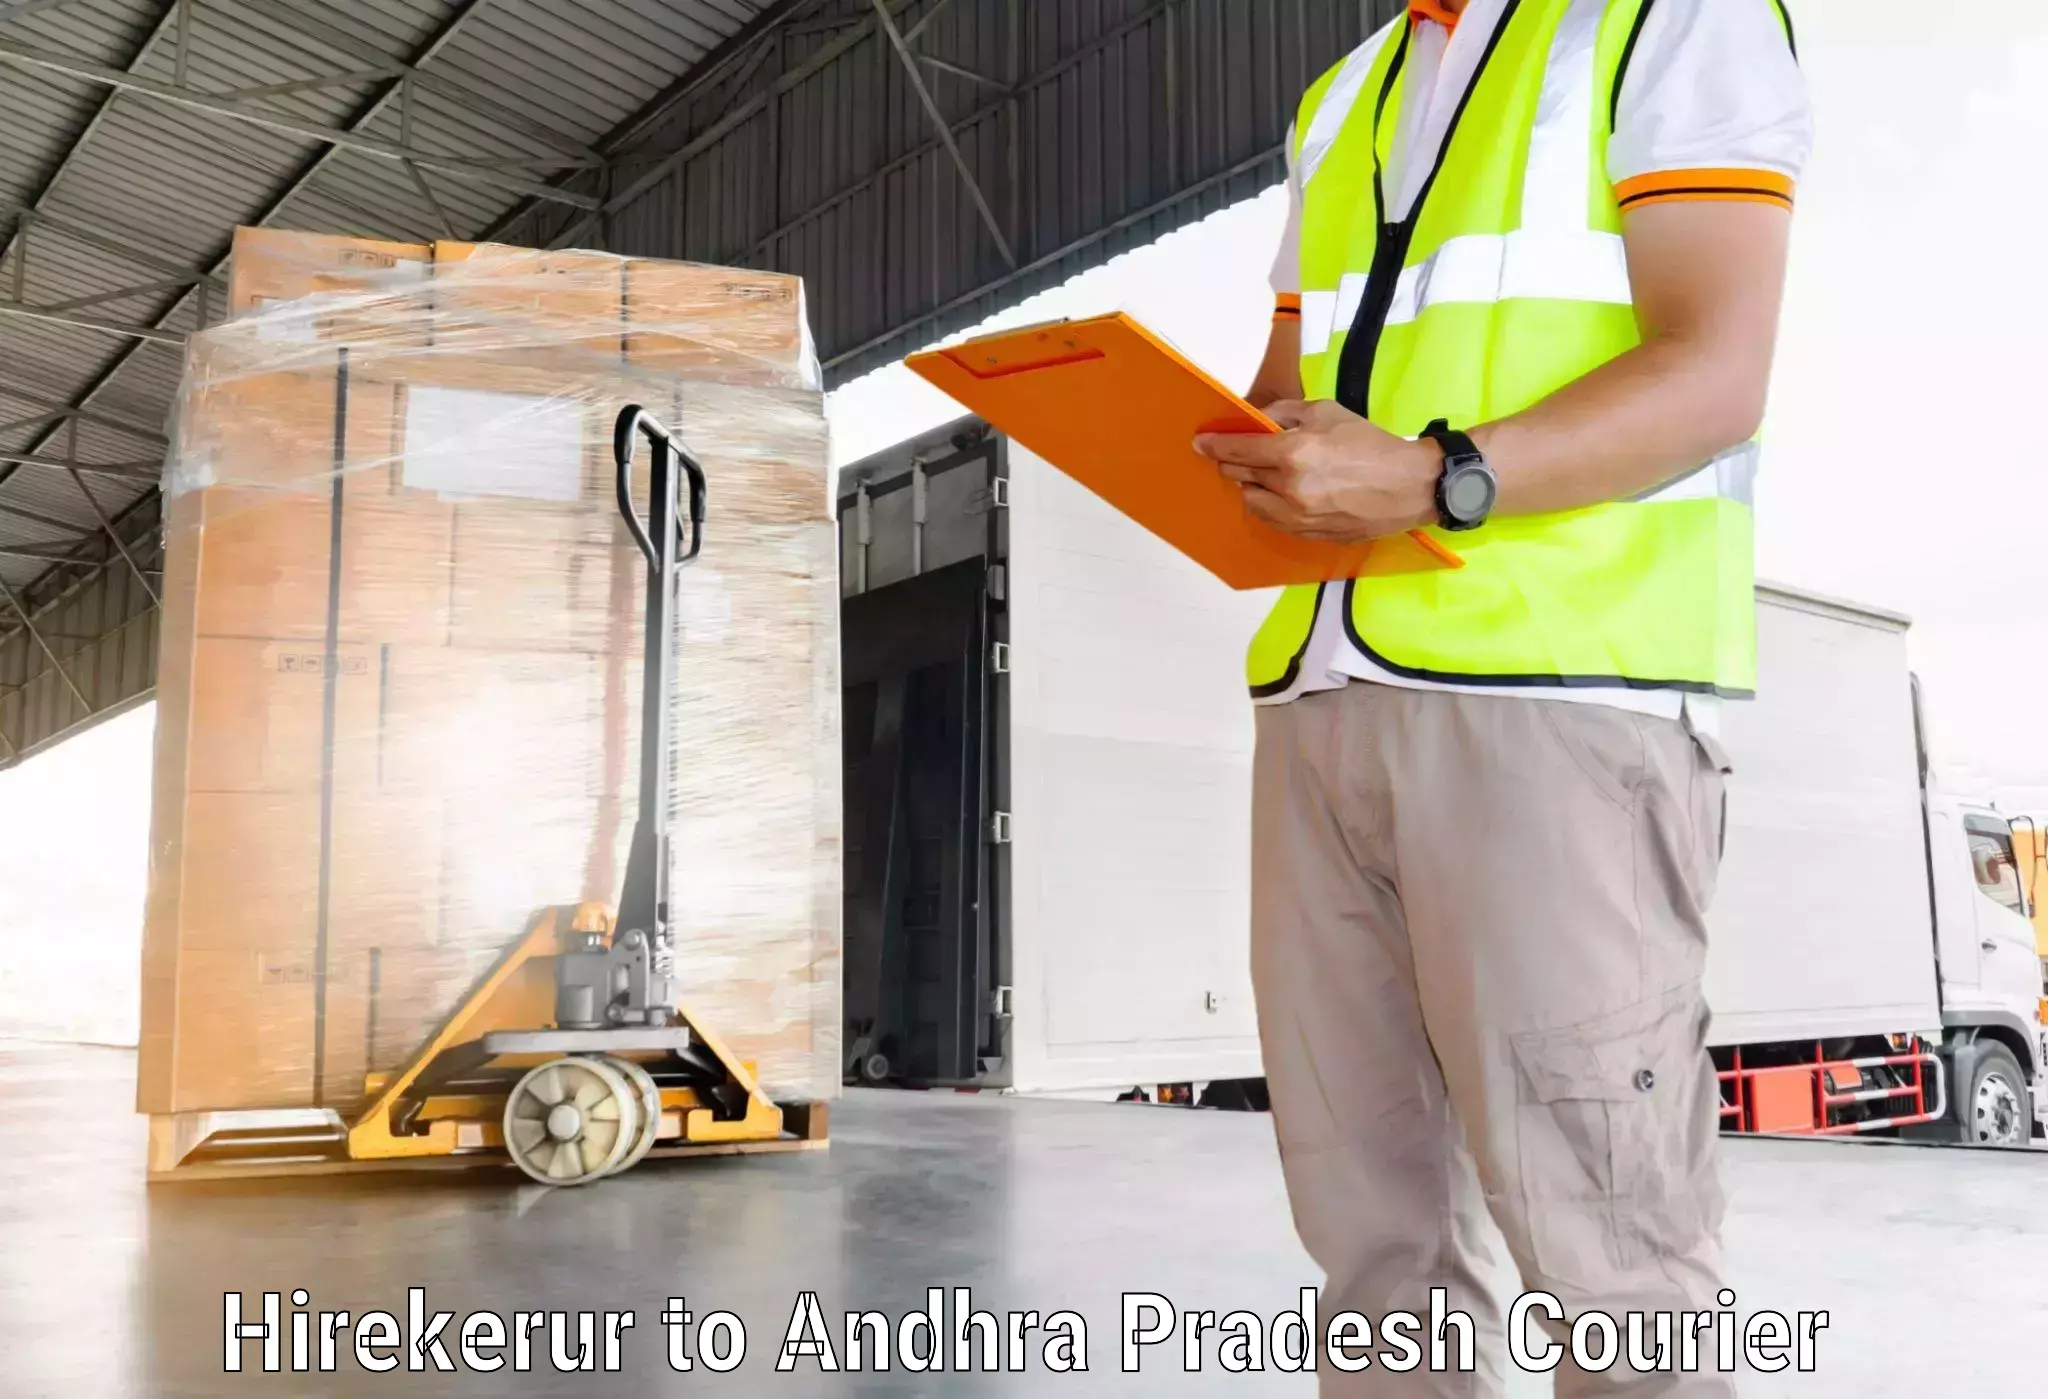 State-of-the-art courier technology Hirekerur to Hukumpetta